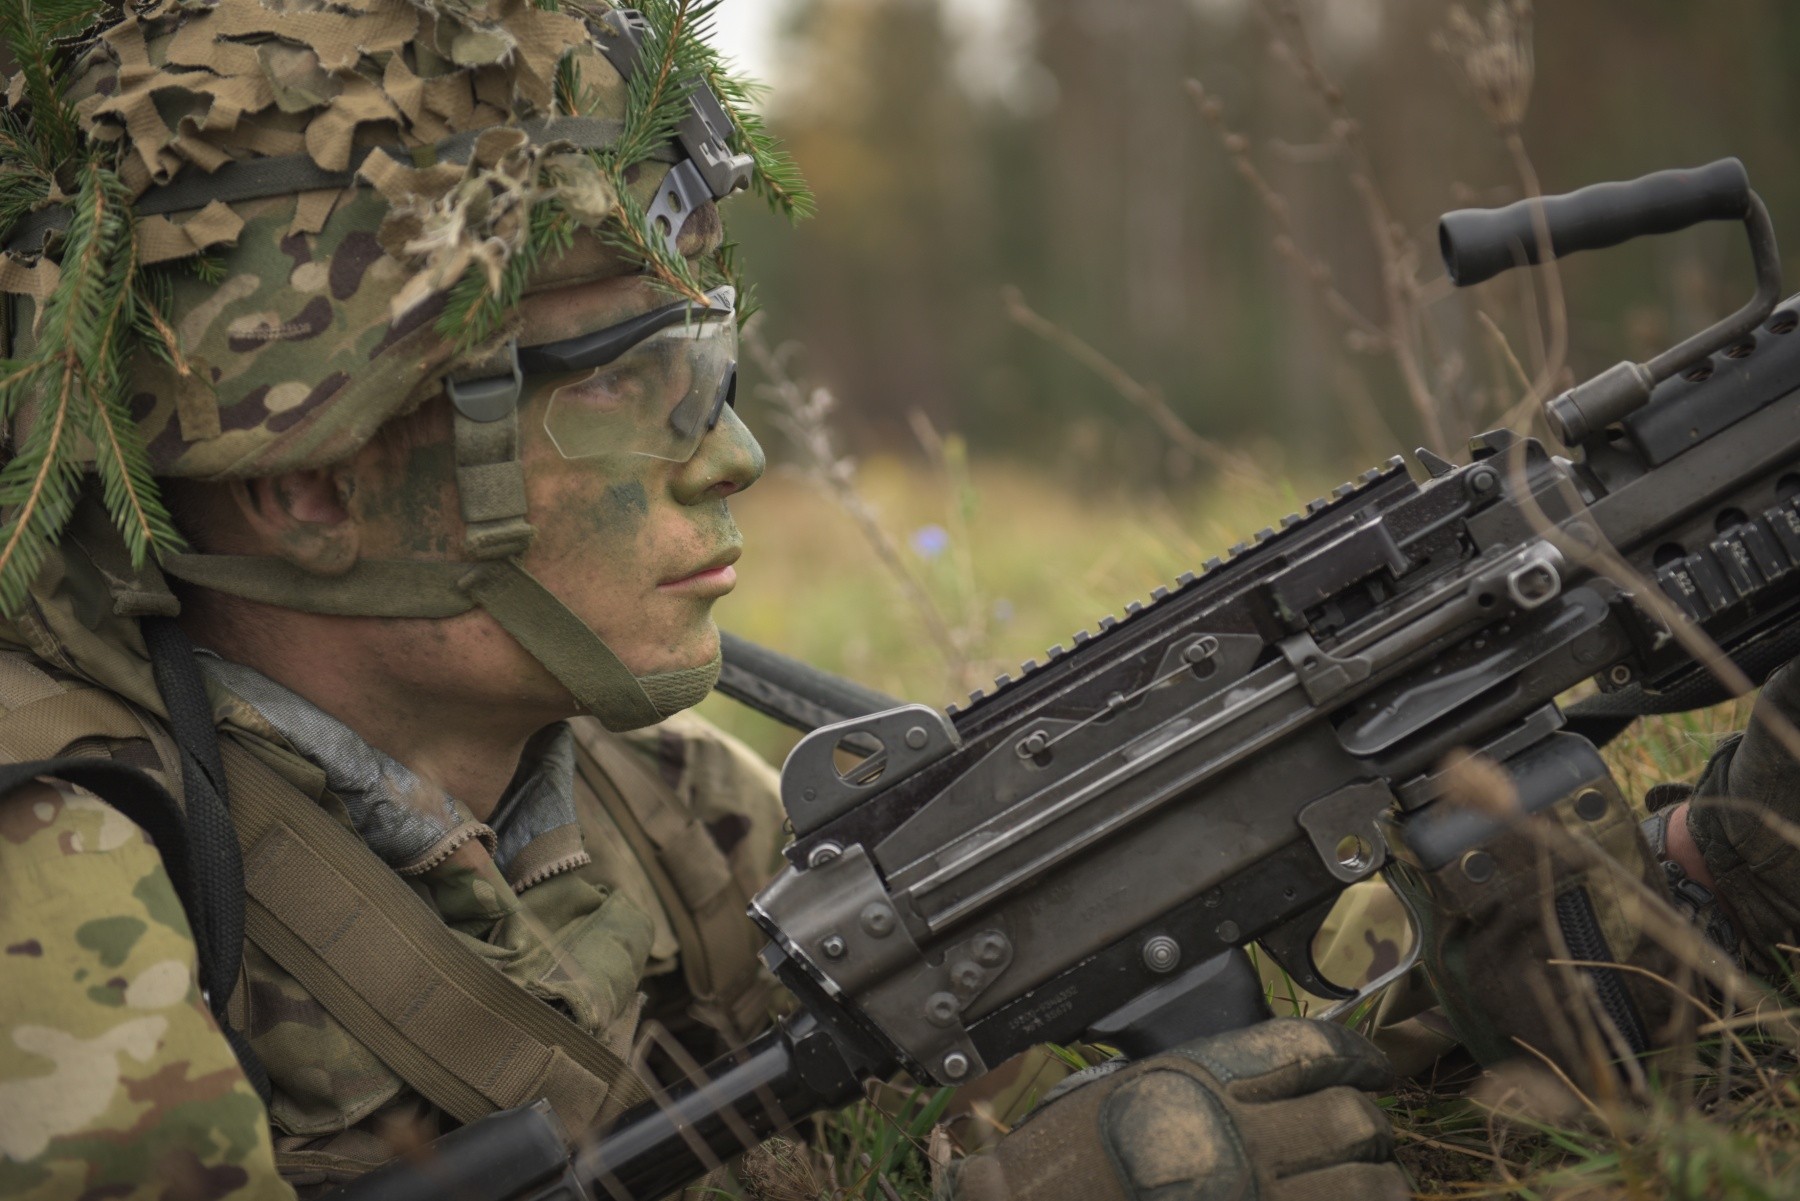 Snipers, body armour and anti-aircraft guns: The planning that